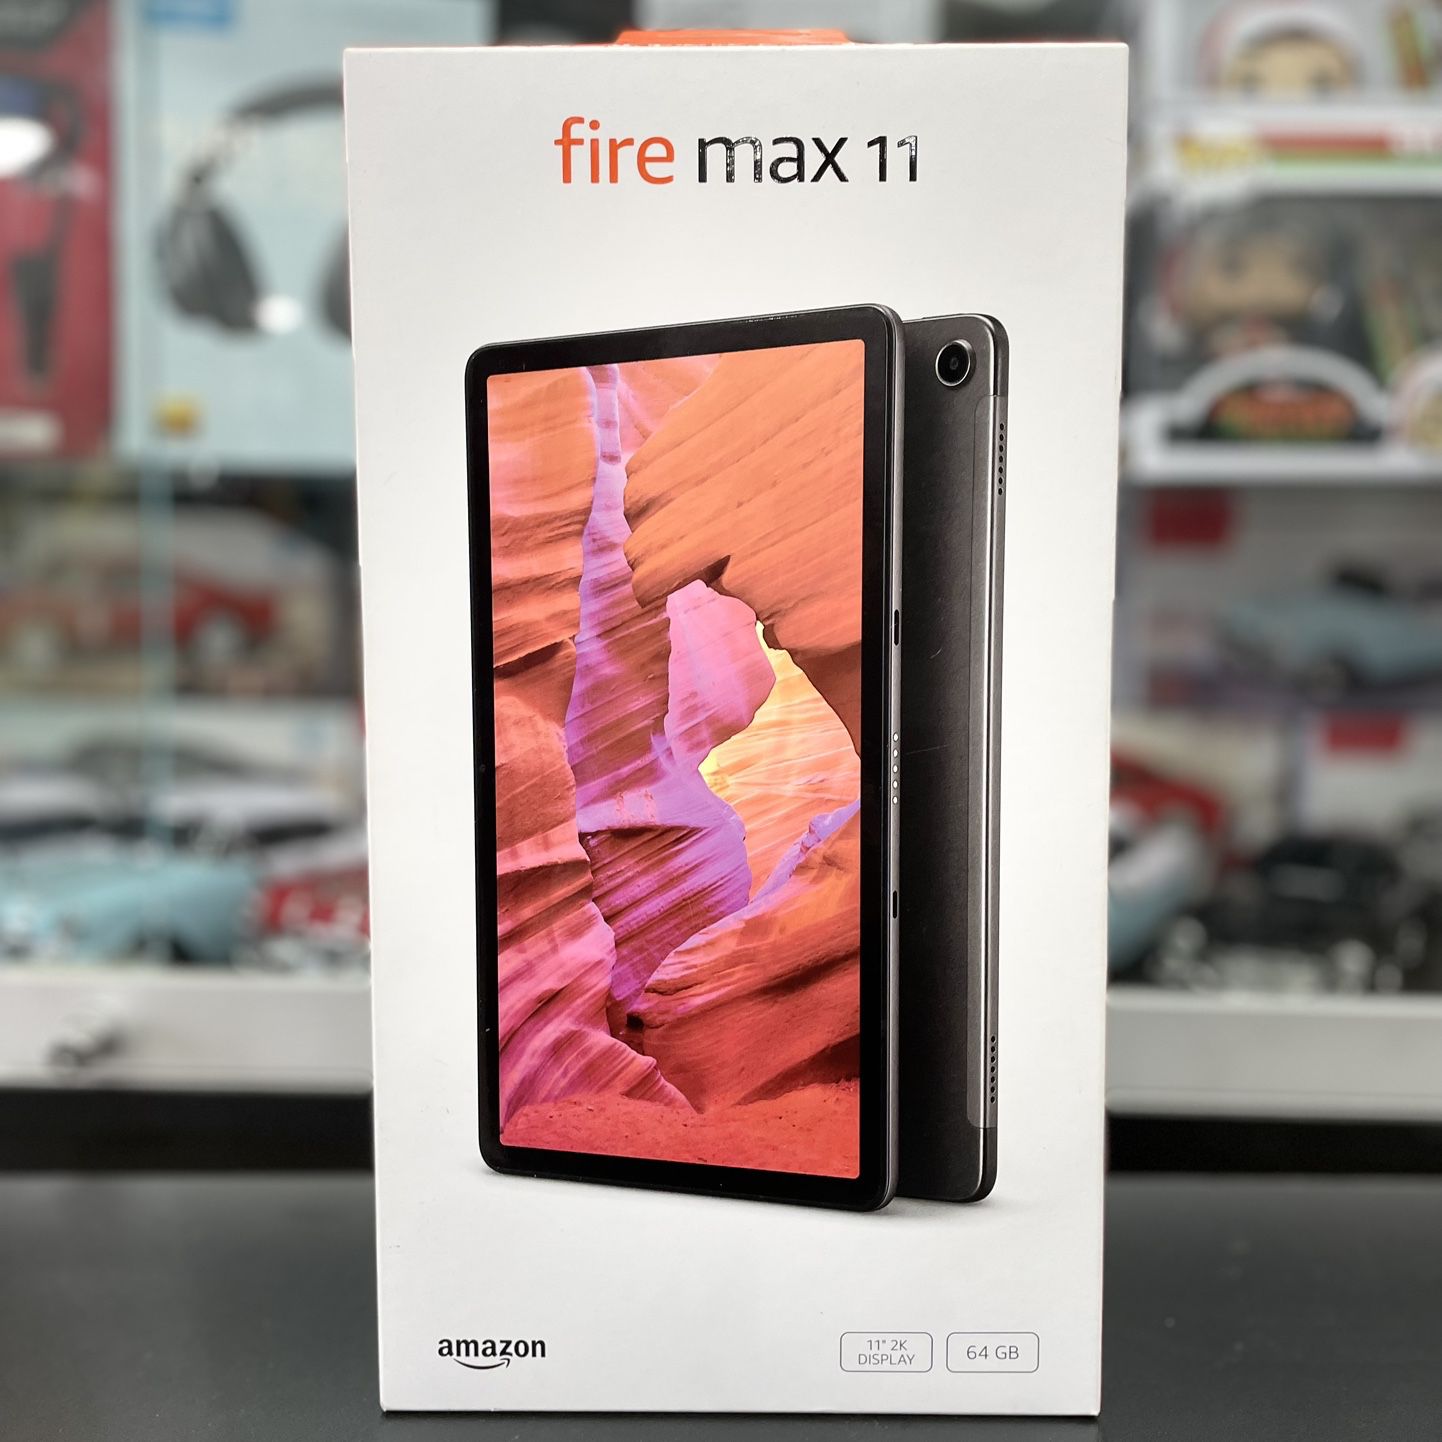 Amazon Tablet Fire Max 11 (New)